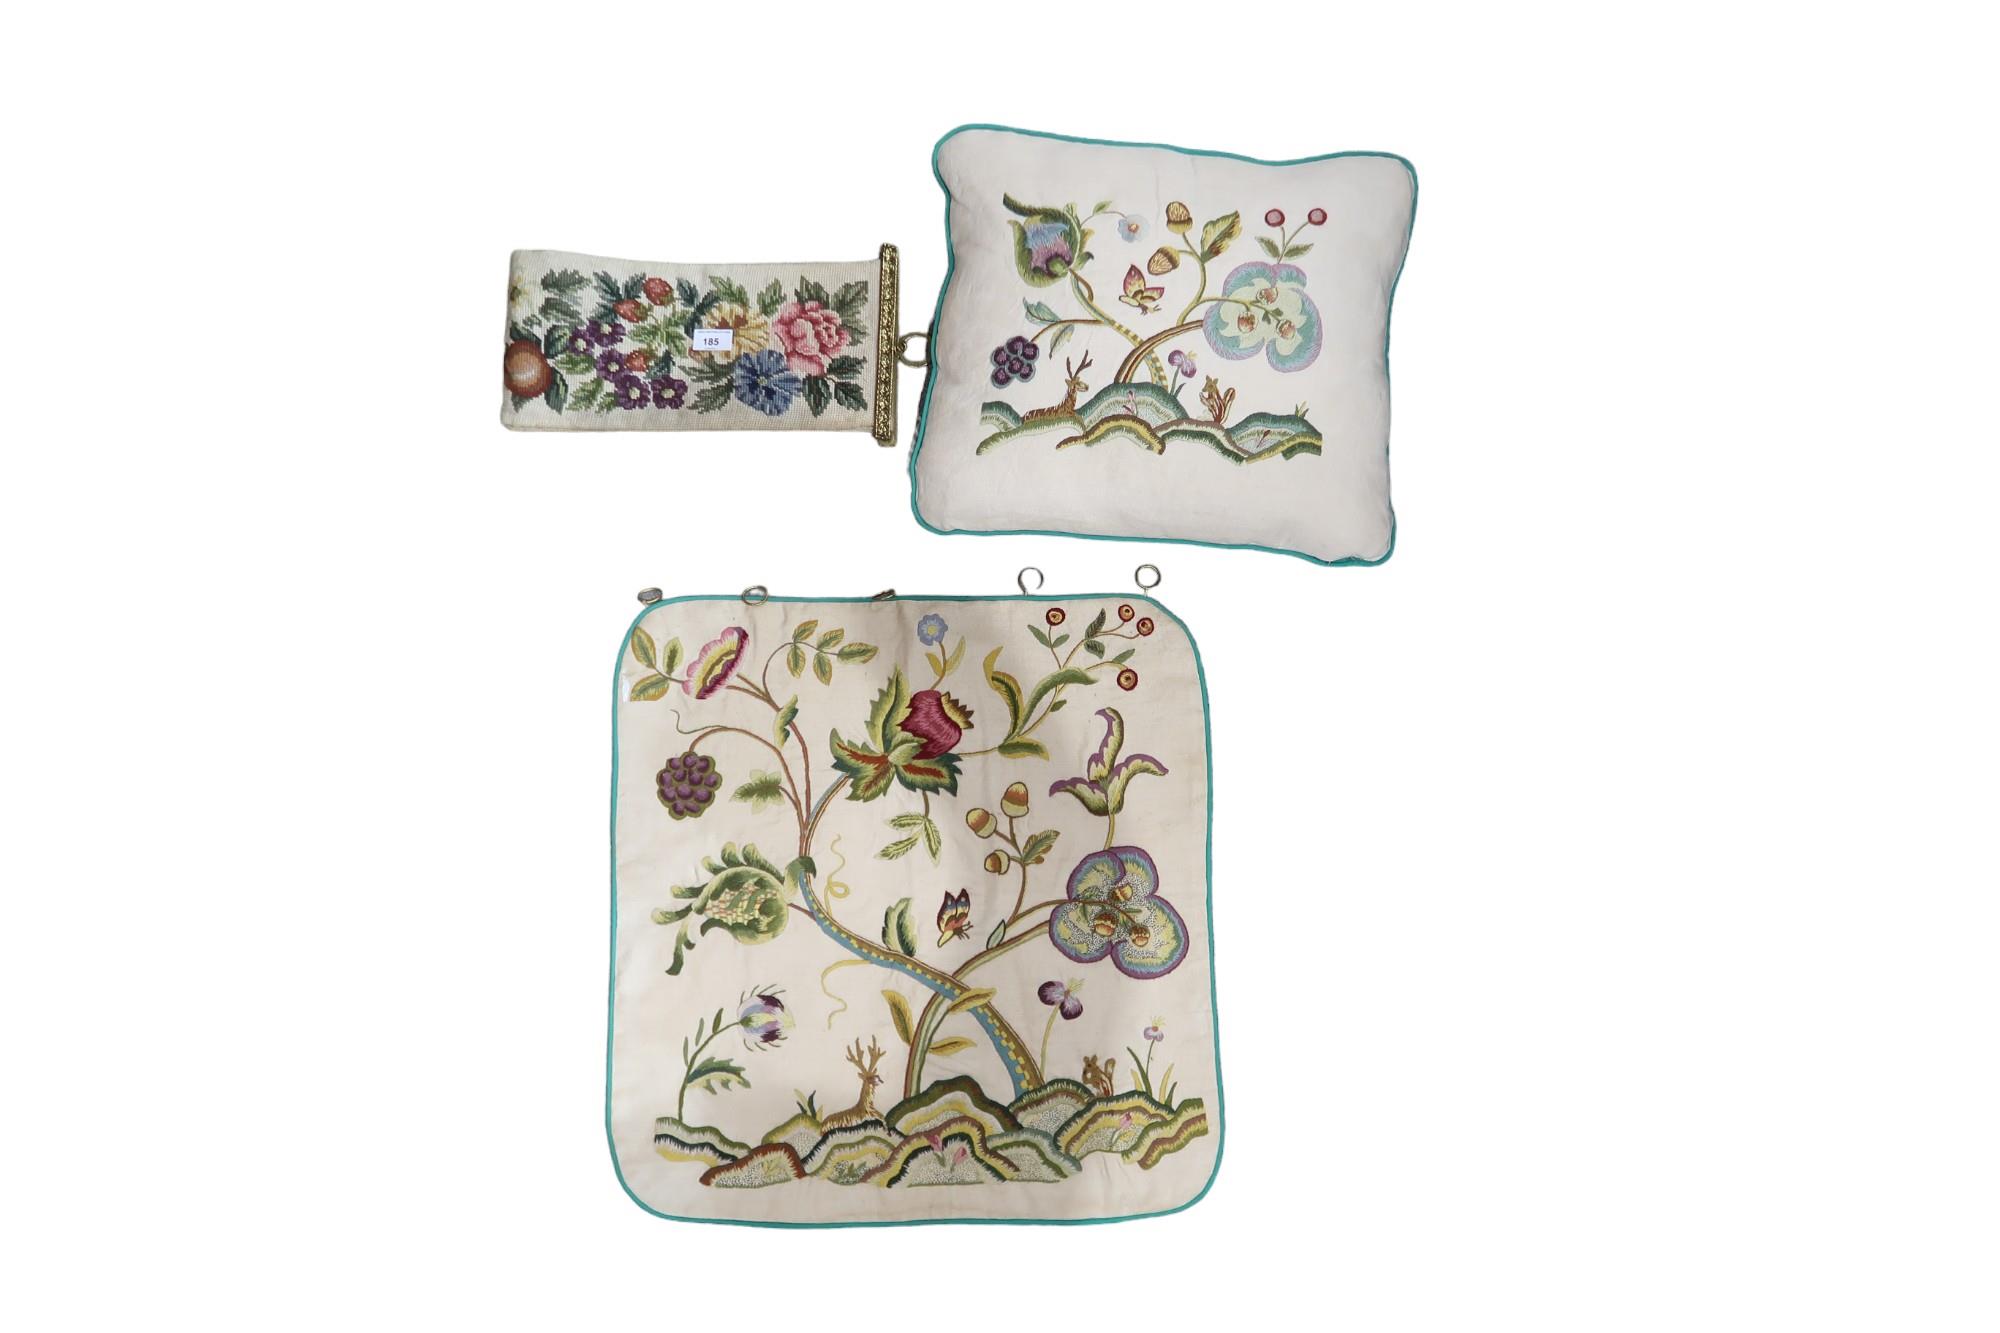 A crewel work cushion and matching wall hanging together with an embroidered tapestry panel